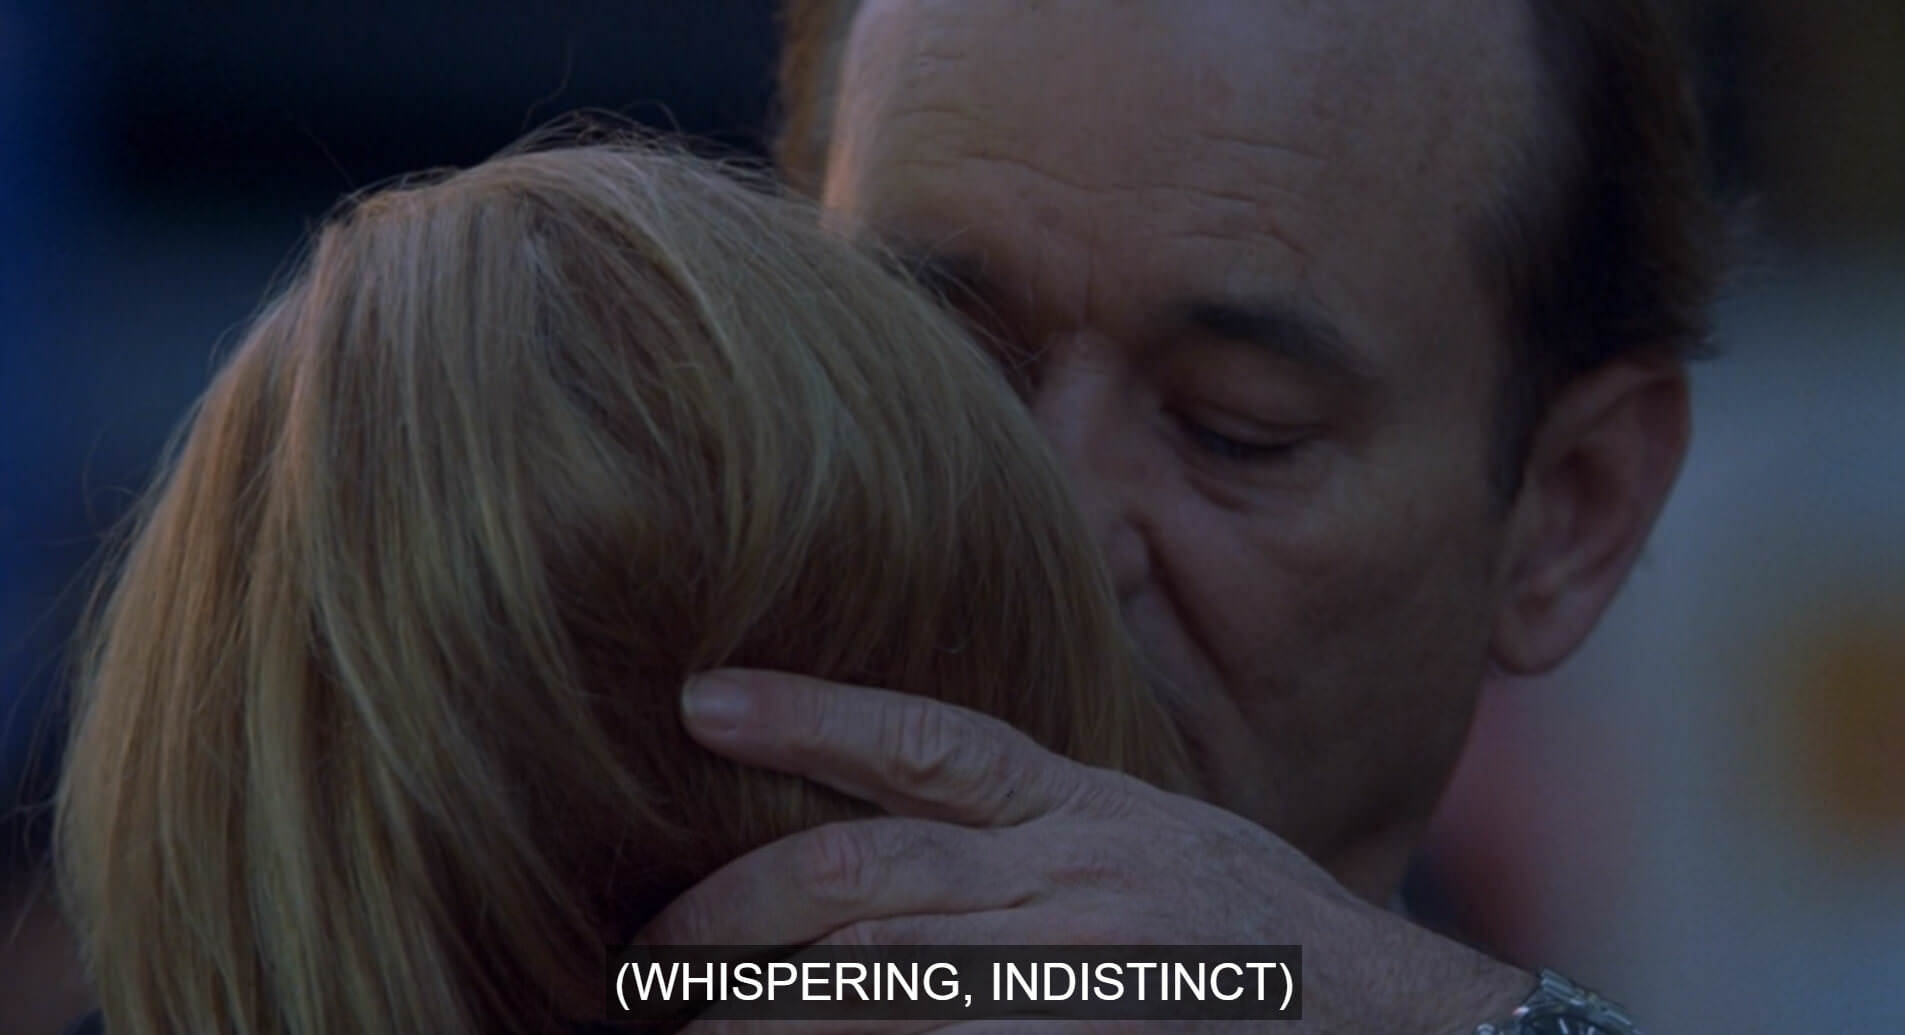 a screenshot of Bill Murray's character whispering into the ear Scarlett Johansson's character. The caption at the bottom reads (whispering, indistinct) in brackets.